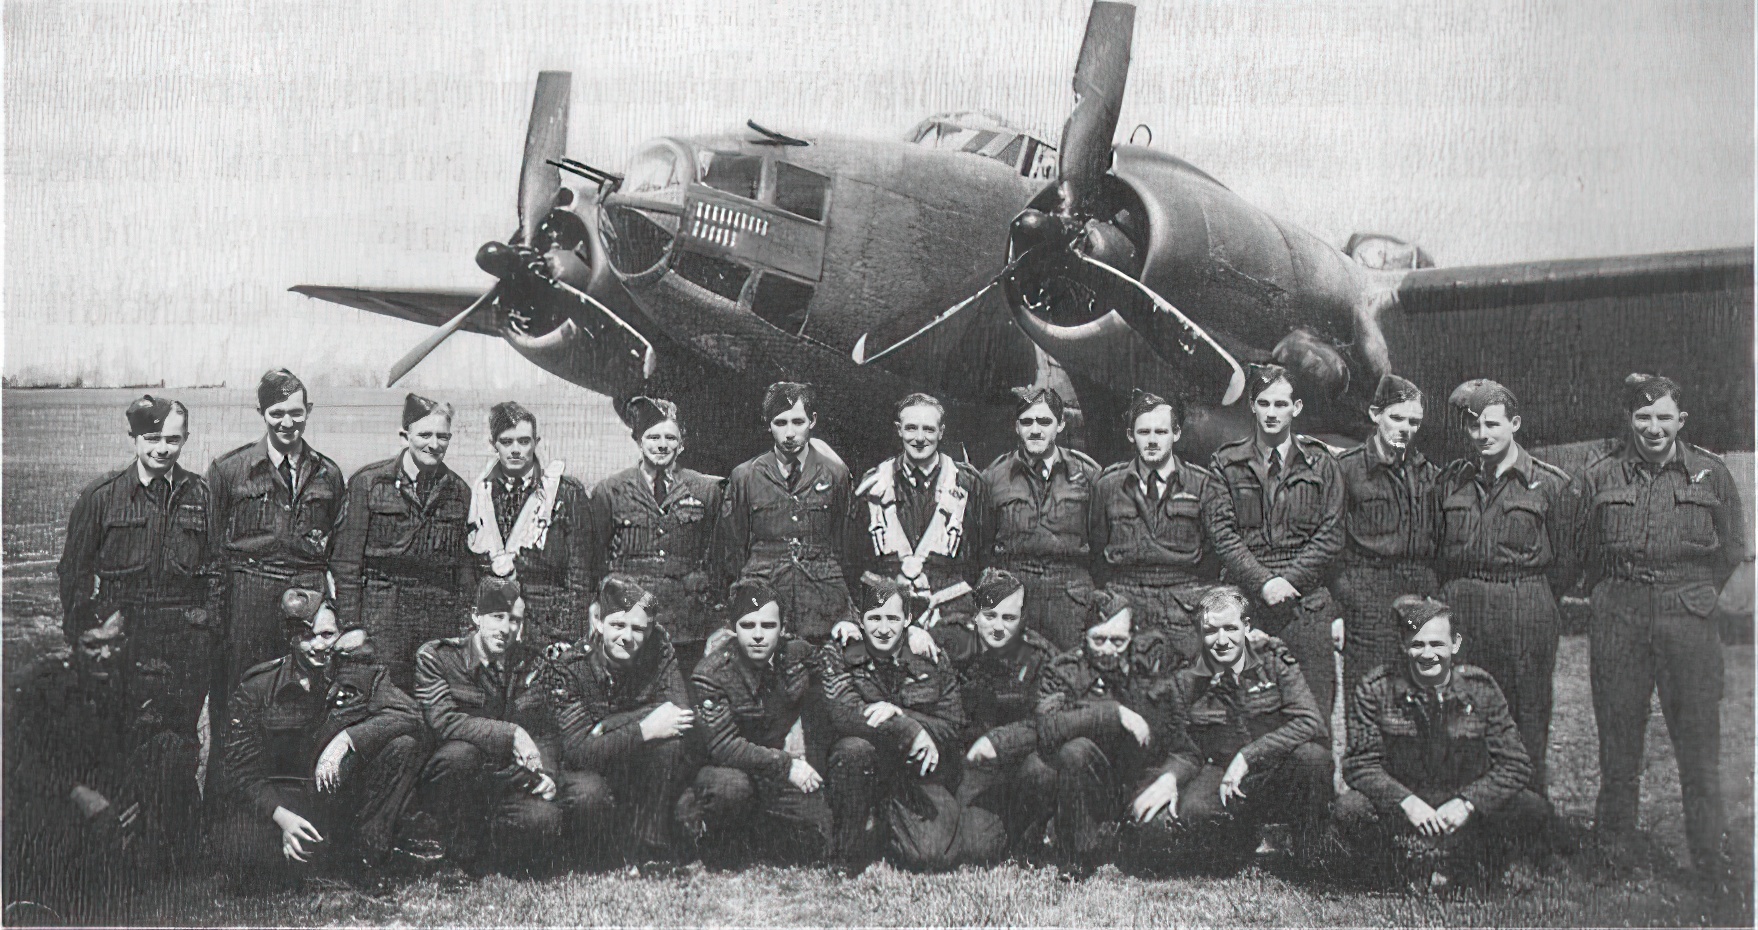 New Zealand non-commissioned aircrew serving with the RAF in No. 487 Squadron RNZAF at Methwold in front of Lockheed Ventura EG-A in early 1943